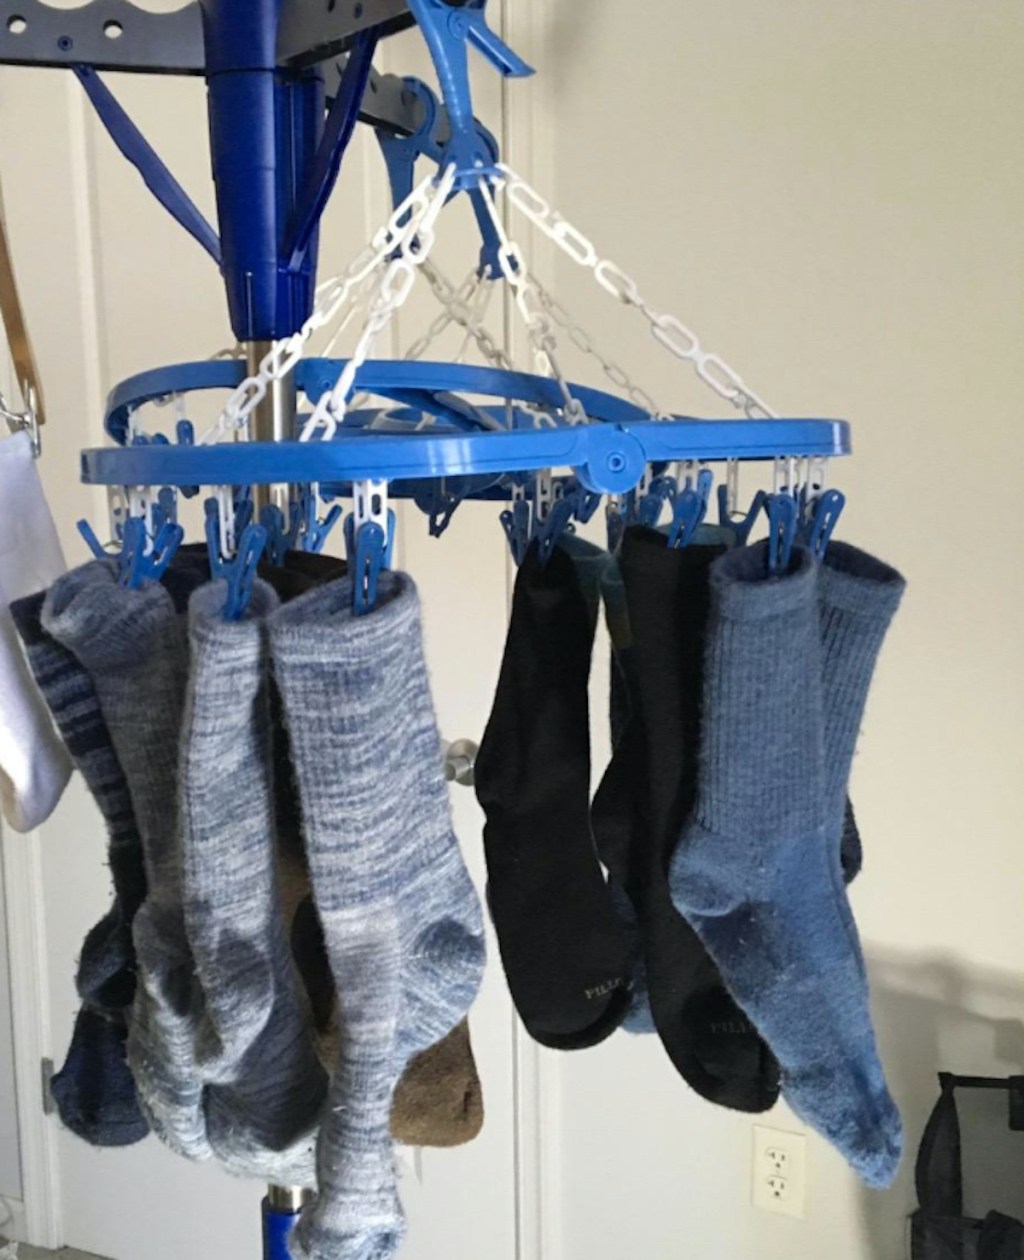 laundry room organization hanging clips dryer with various pairs of socks